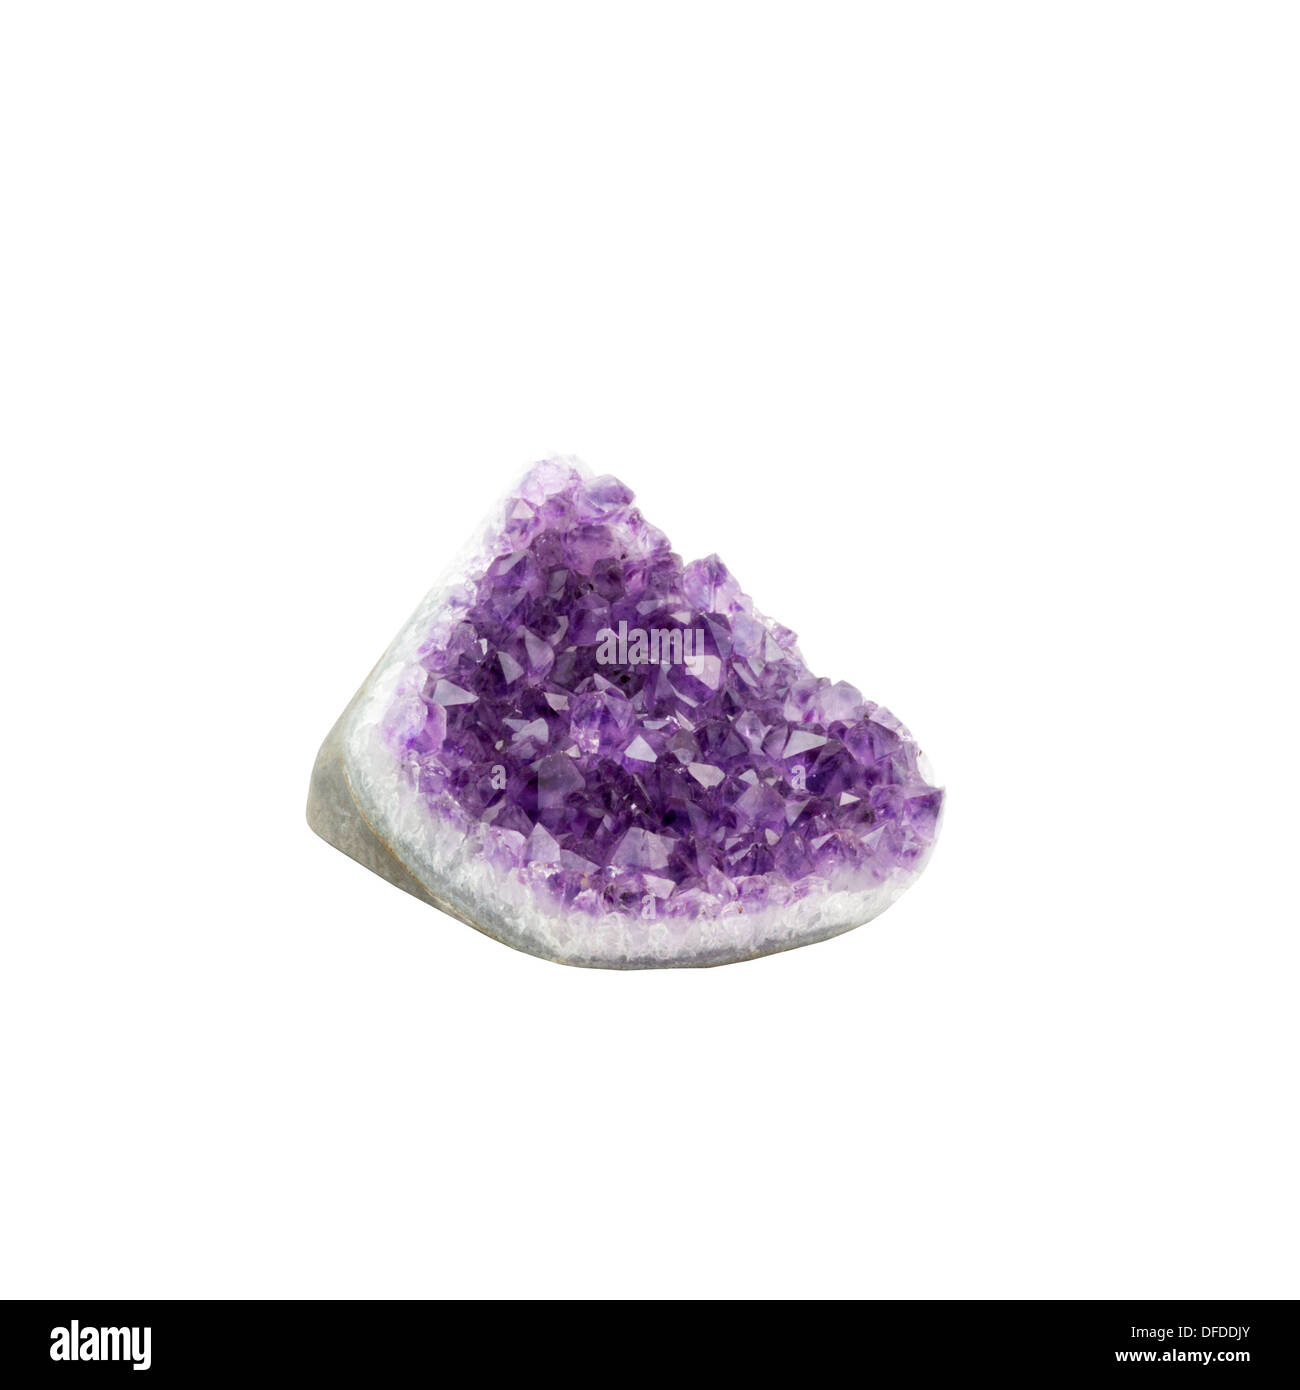 Amethyst quartz crystals, cut out on white background Stock Photo